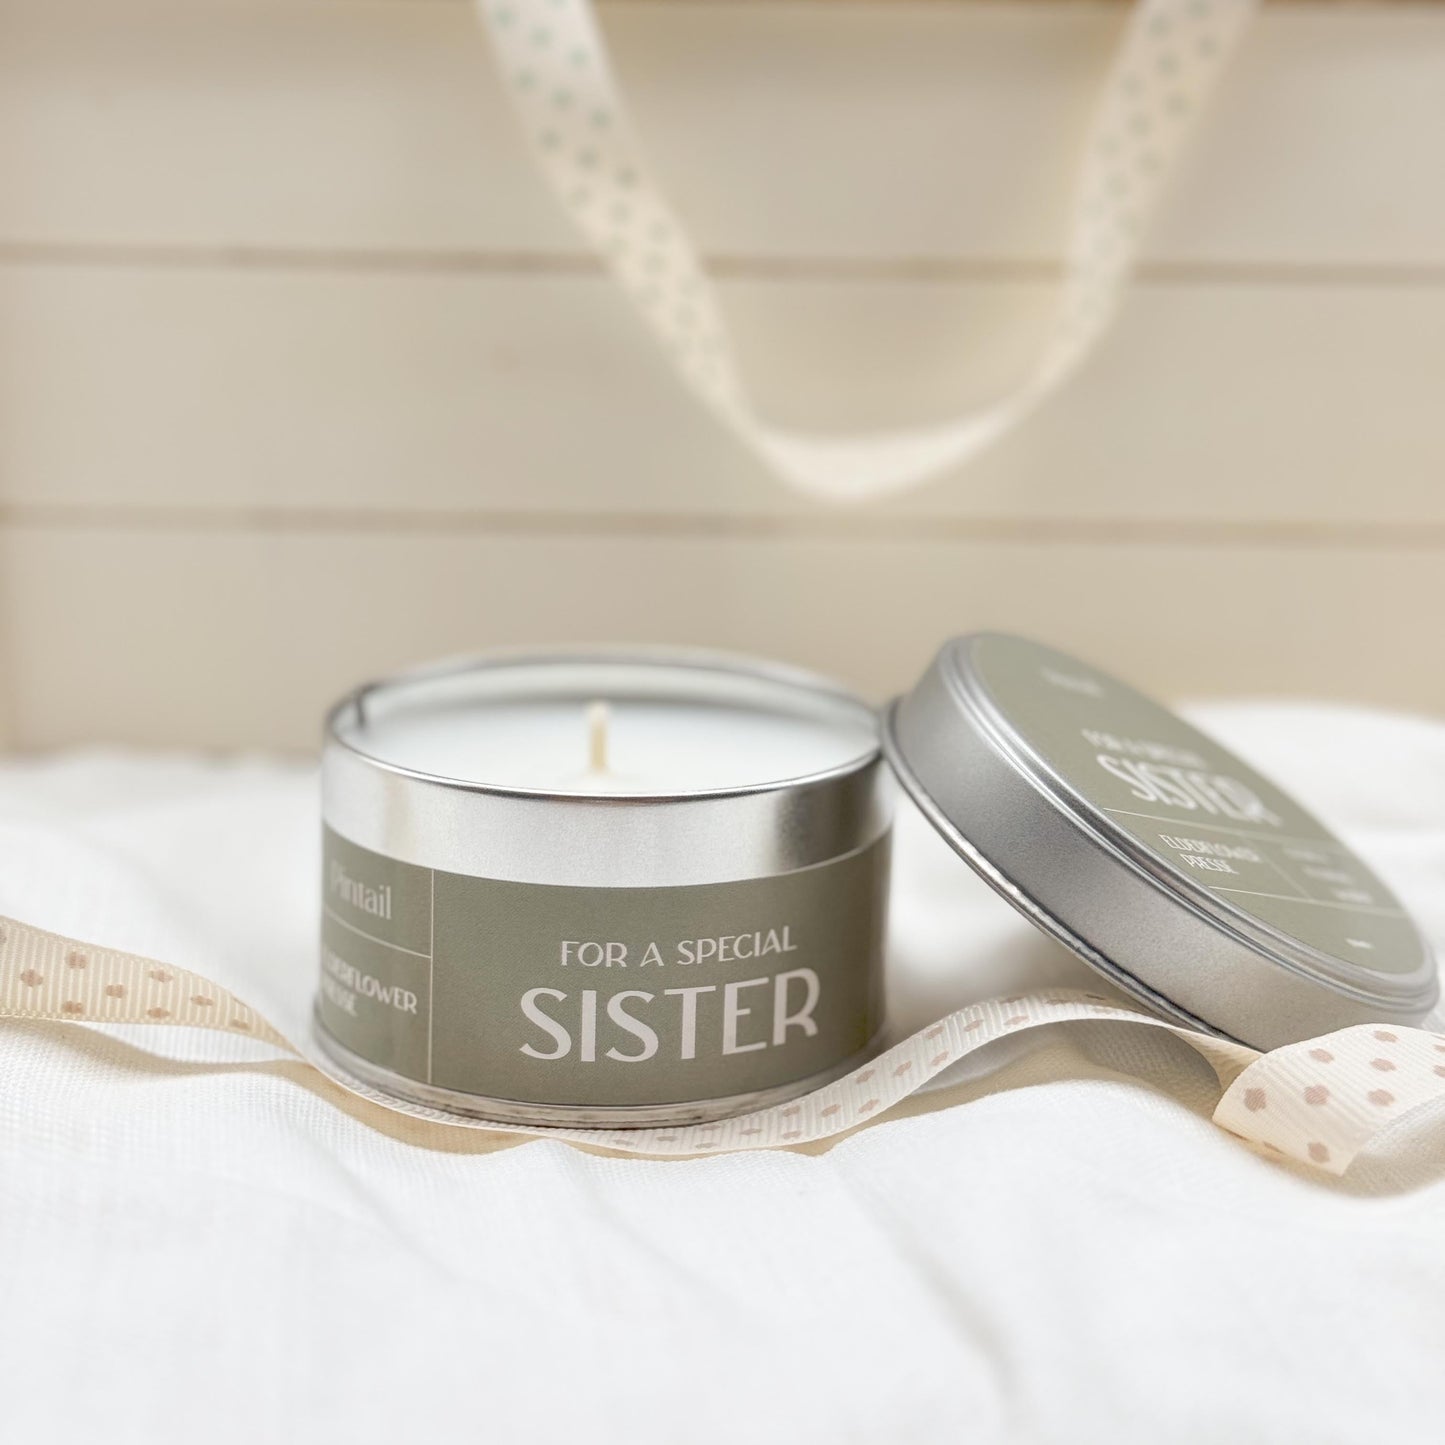 'For a Special Sister' Elderflower Press Occasion Candle